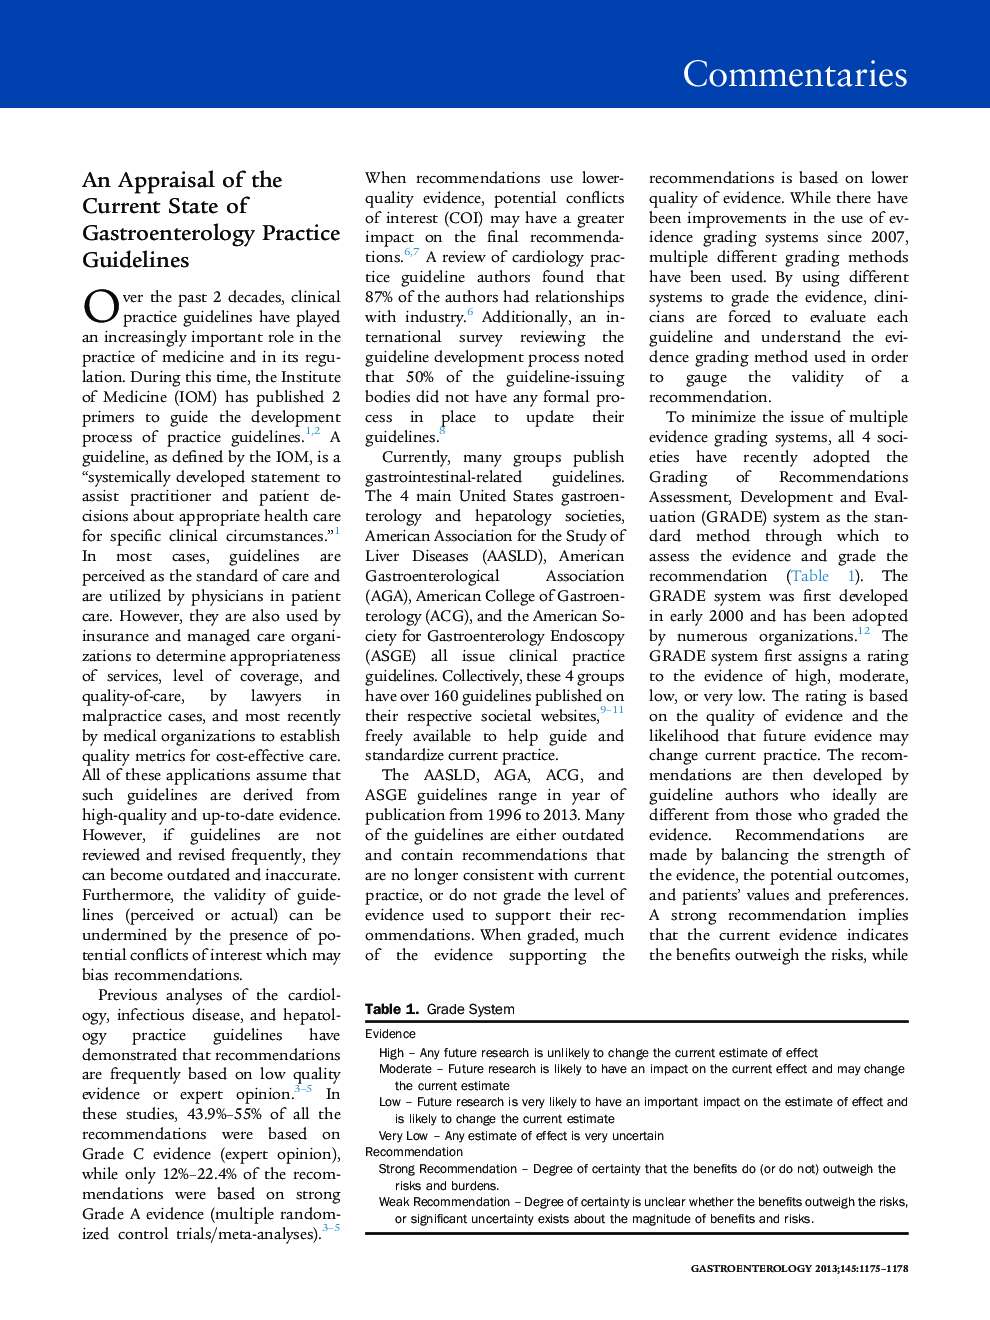 An Appraisal of the Current State of Gastroenterology Practice Guidelines